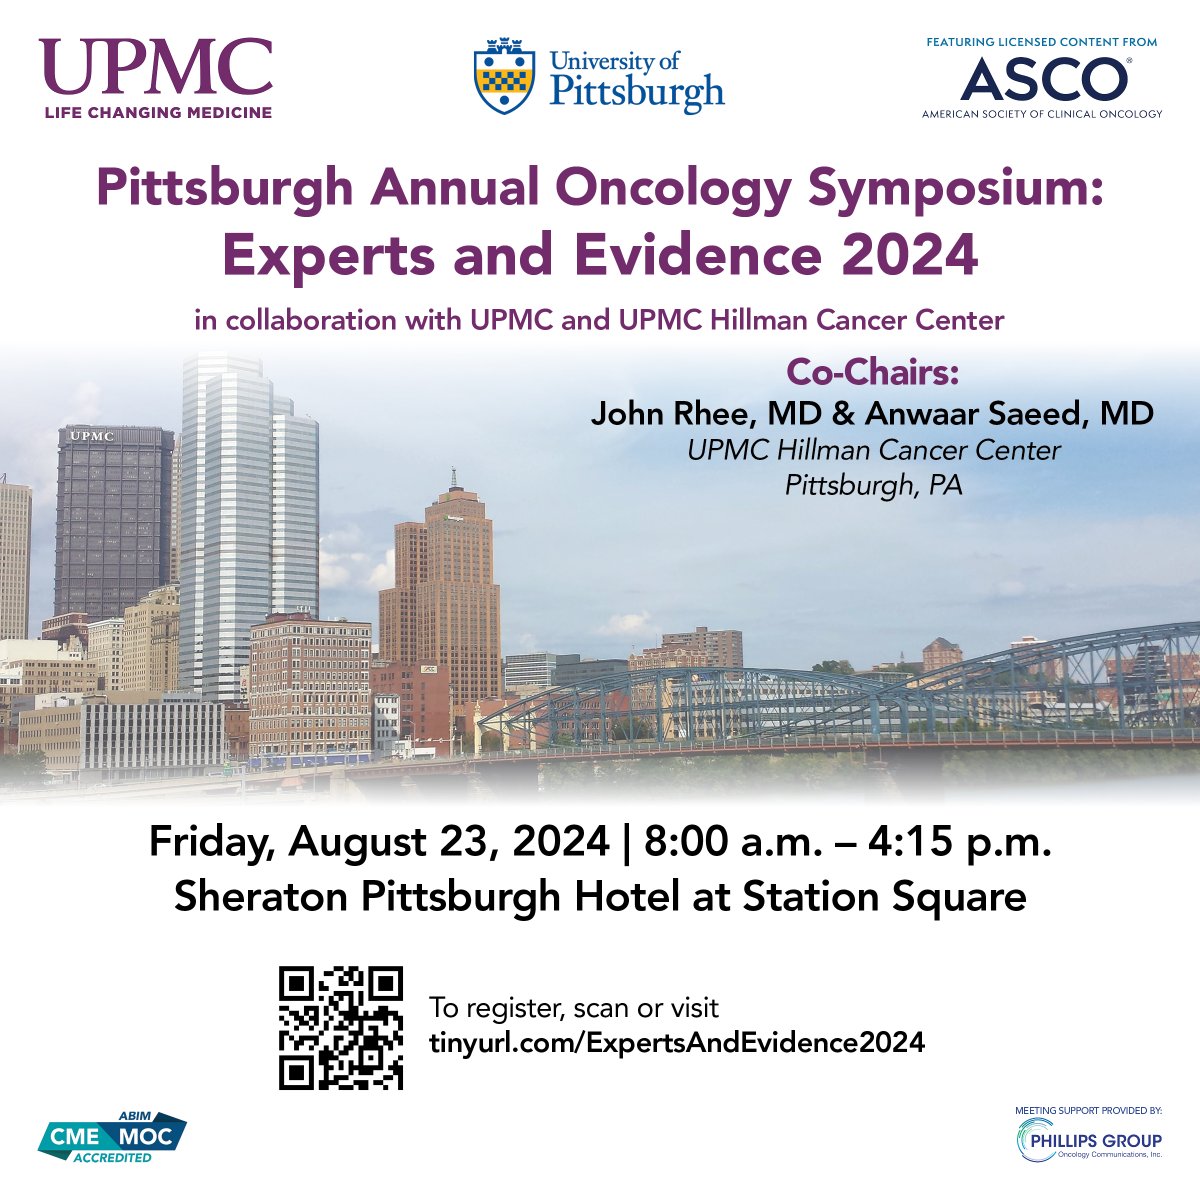 Looking forward to discussing Targeted Therapy in NSCLC at the @UPMCHillmanCC Pittsburgh Annual Oncology Symposium on Friday August 23, 2024. Great lung sessions with Drs. Liza Villaruz, Mark Socinski, Tim Burns, and @SudhamshiToom. Hope to see you there!